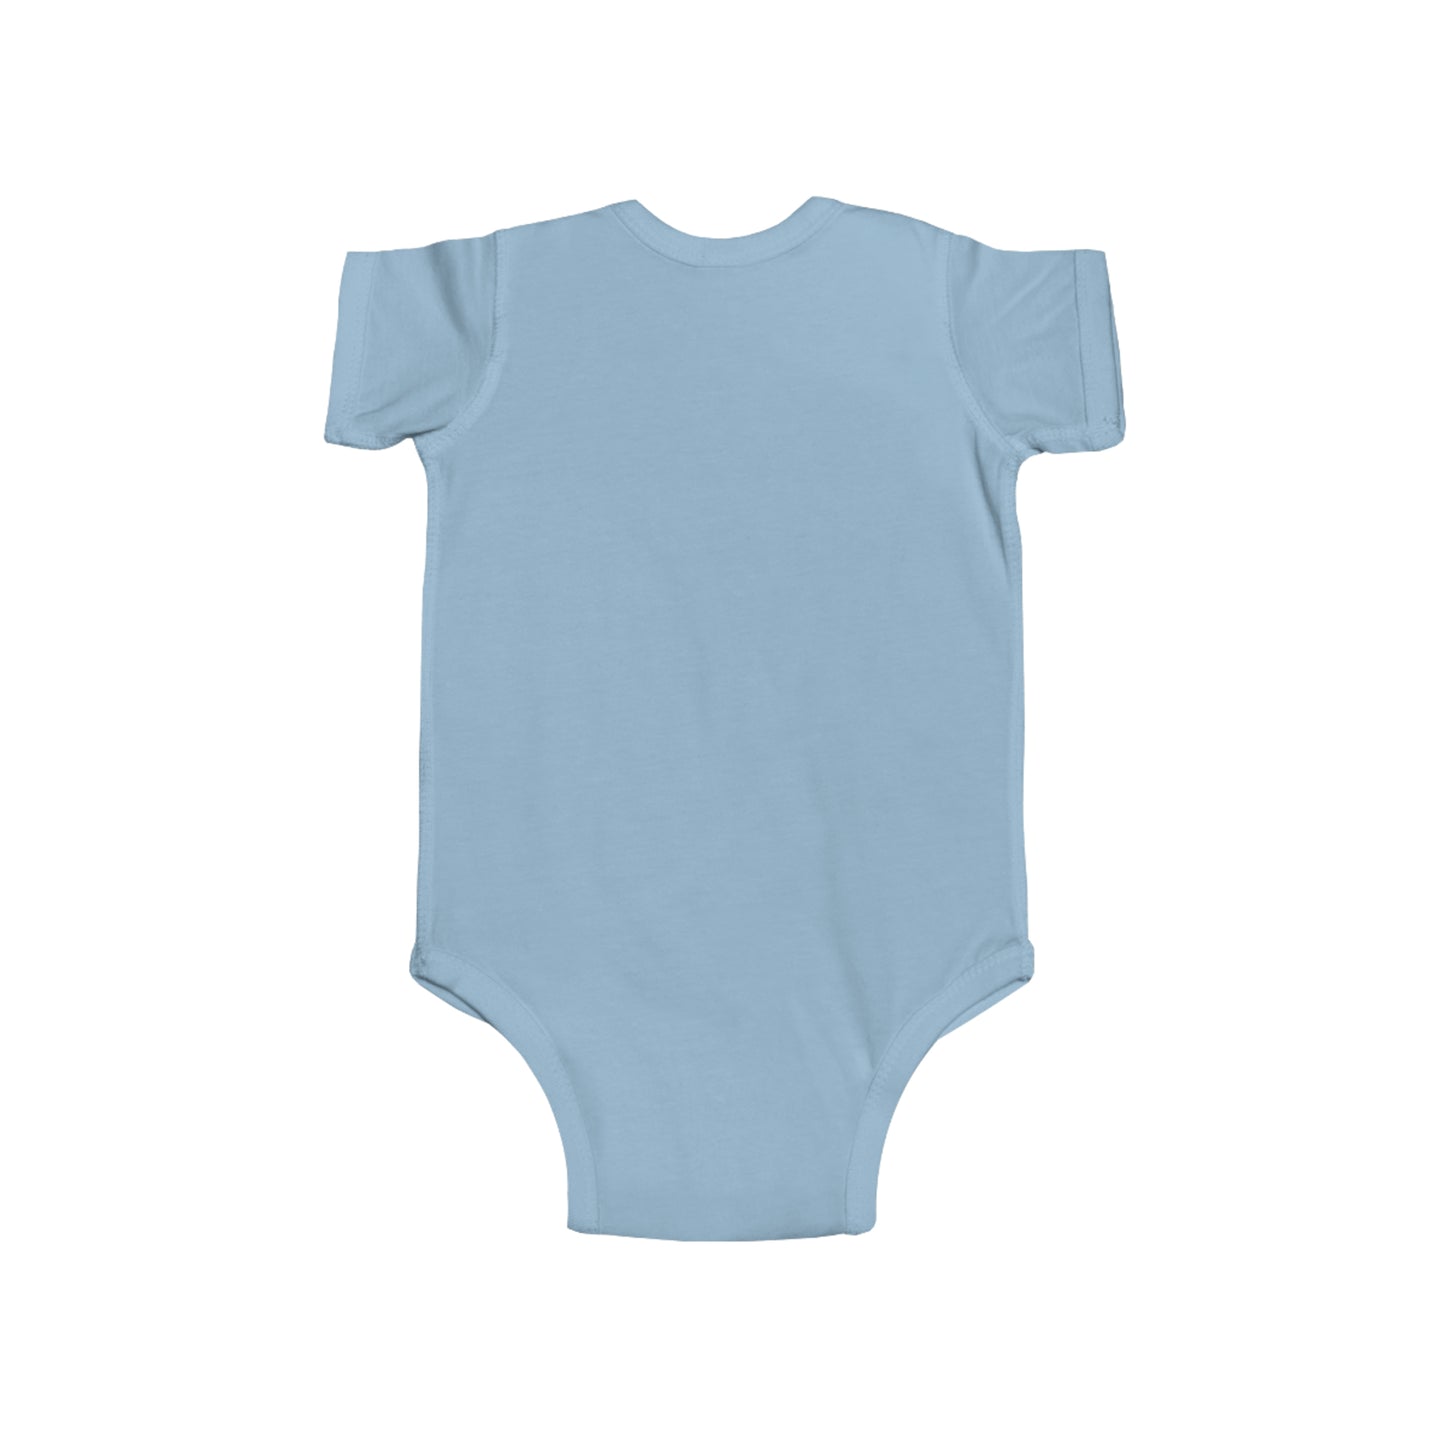 "Mama's New Man" Infant Bodysuit - Weave Got Gifts - Unique Gifts You Won’t Find Anywhere Else!